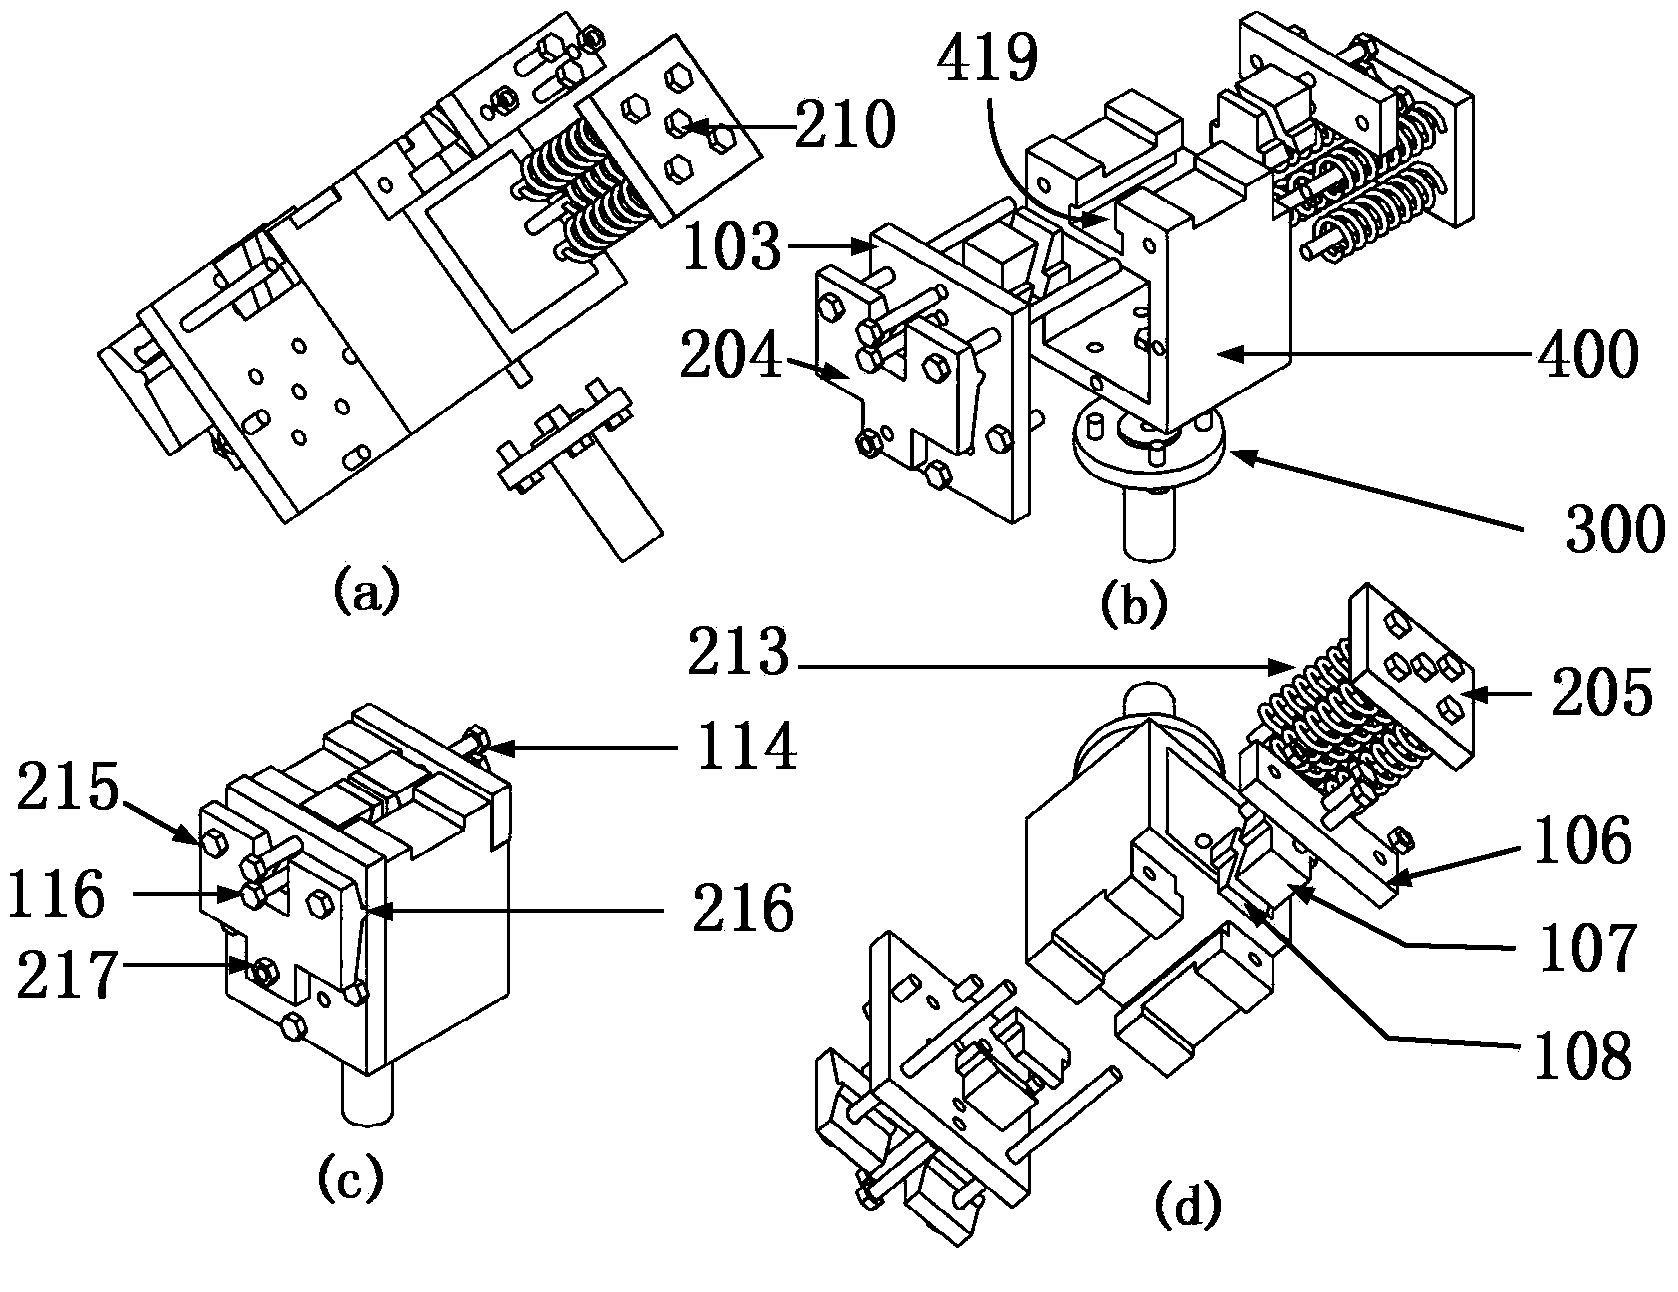 Multifunctional material test clamp based on lever principle